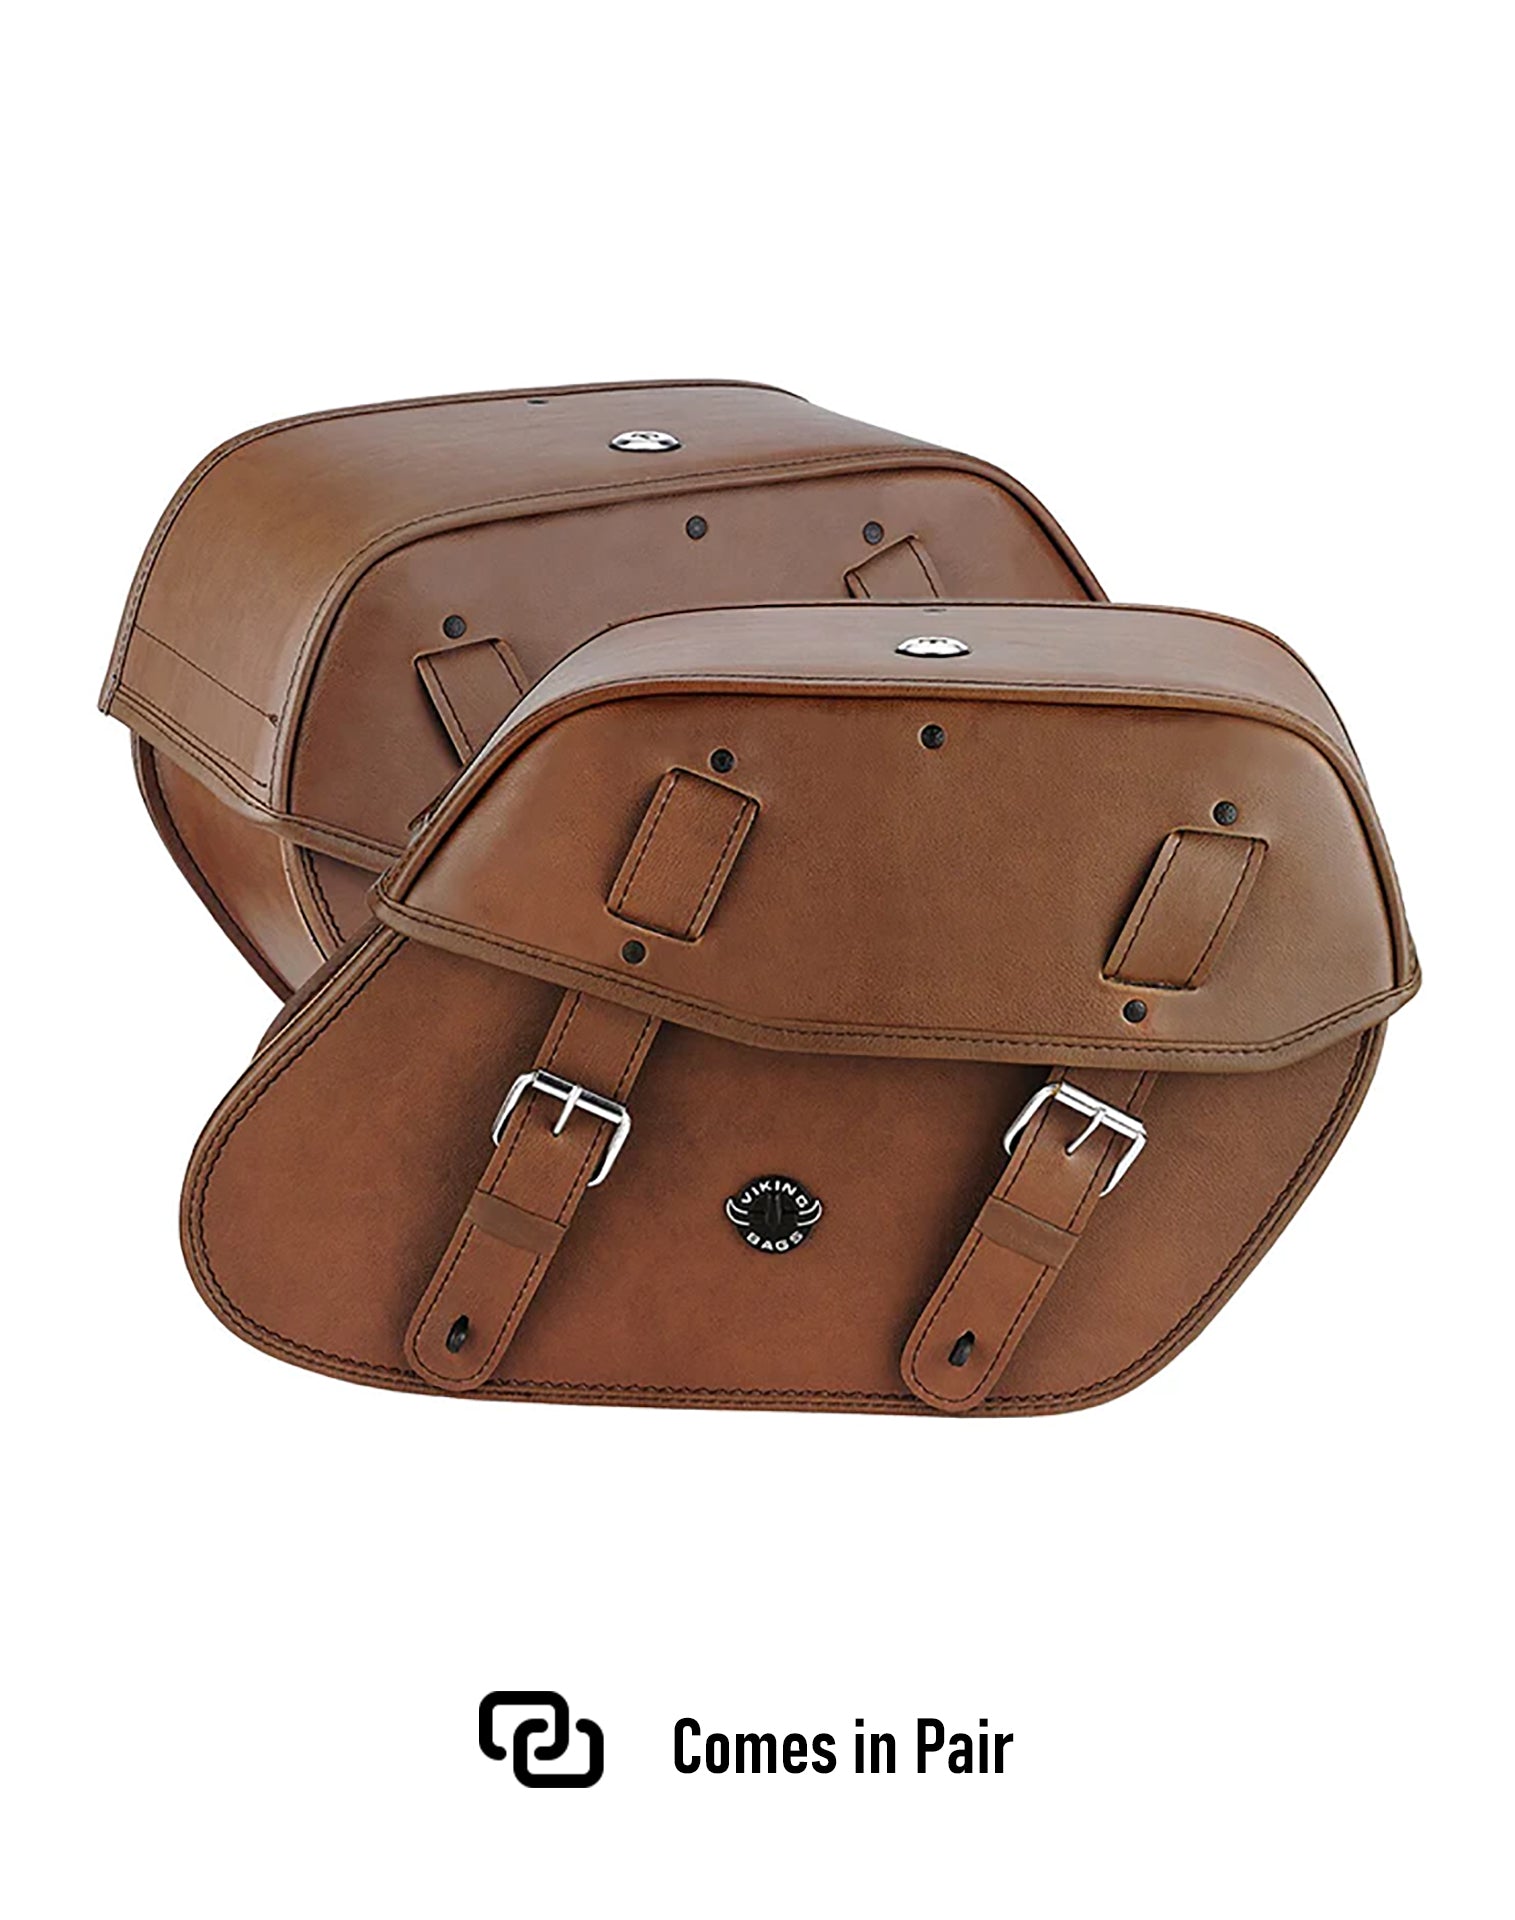 Viking Odin Brown Large Honda Vtx 1300 S Leather Motorcycle Saddlebags Weather Resistant Bags Comes in Pair